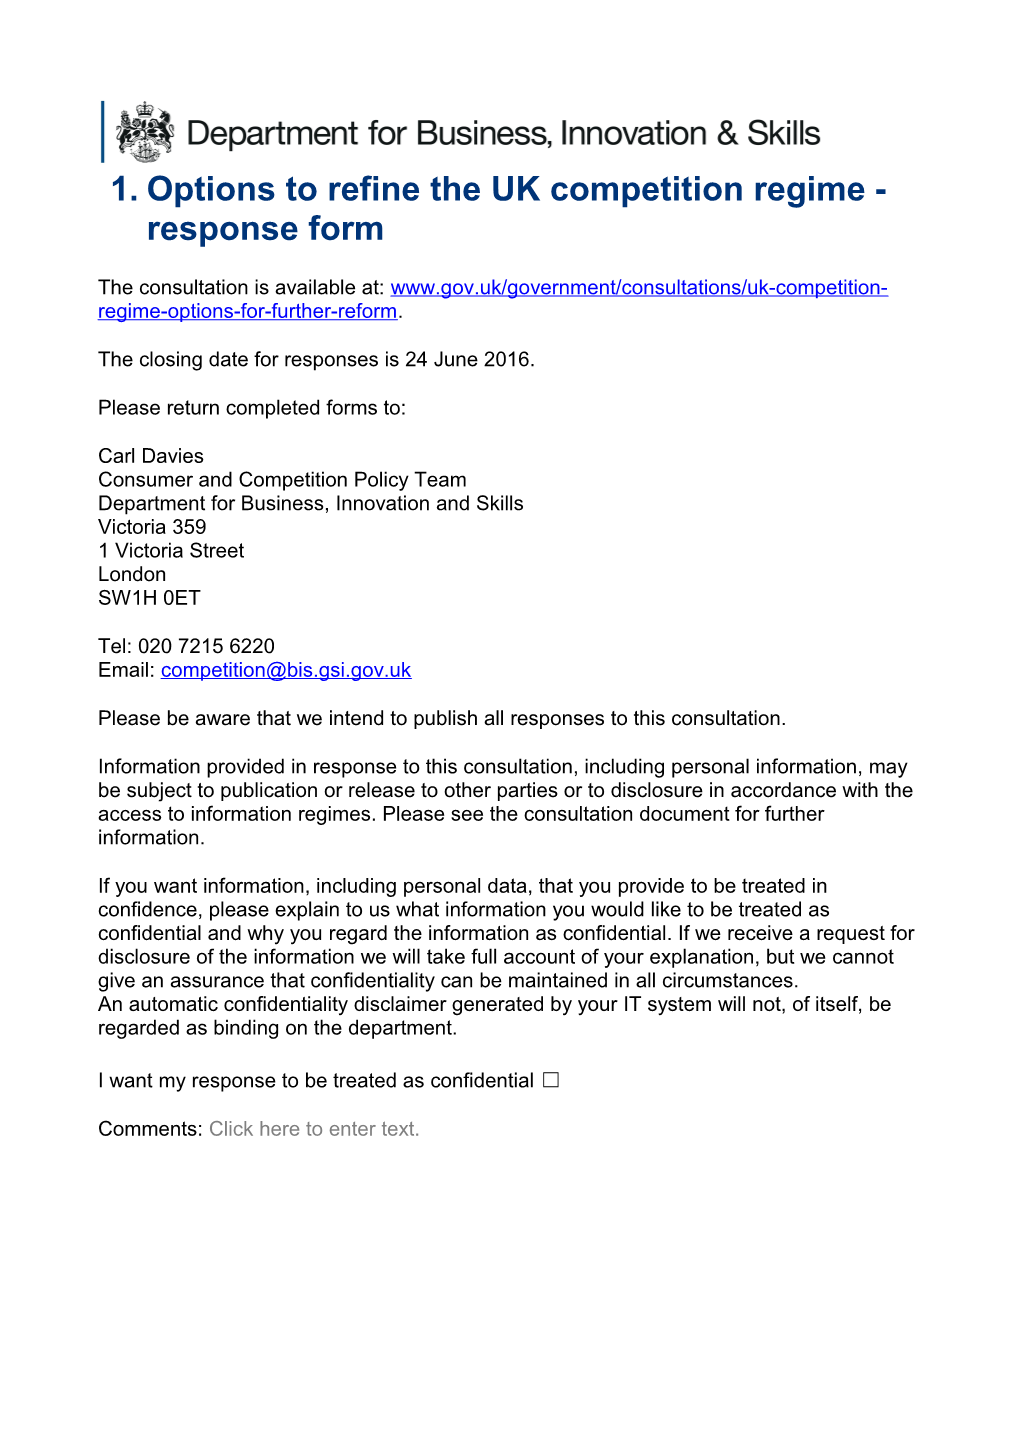 Options to Refine the UK Competition Regime - Response Form